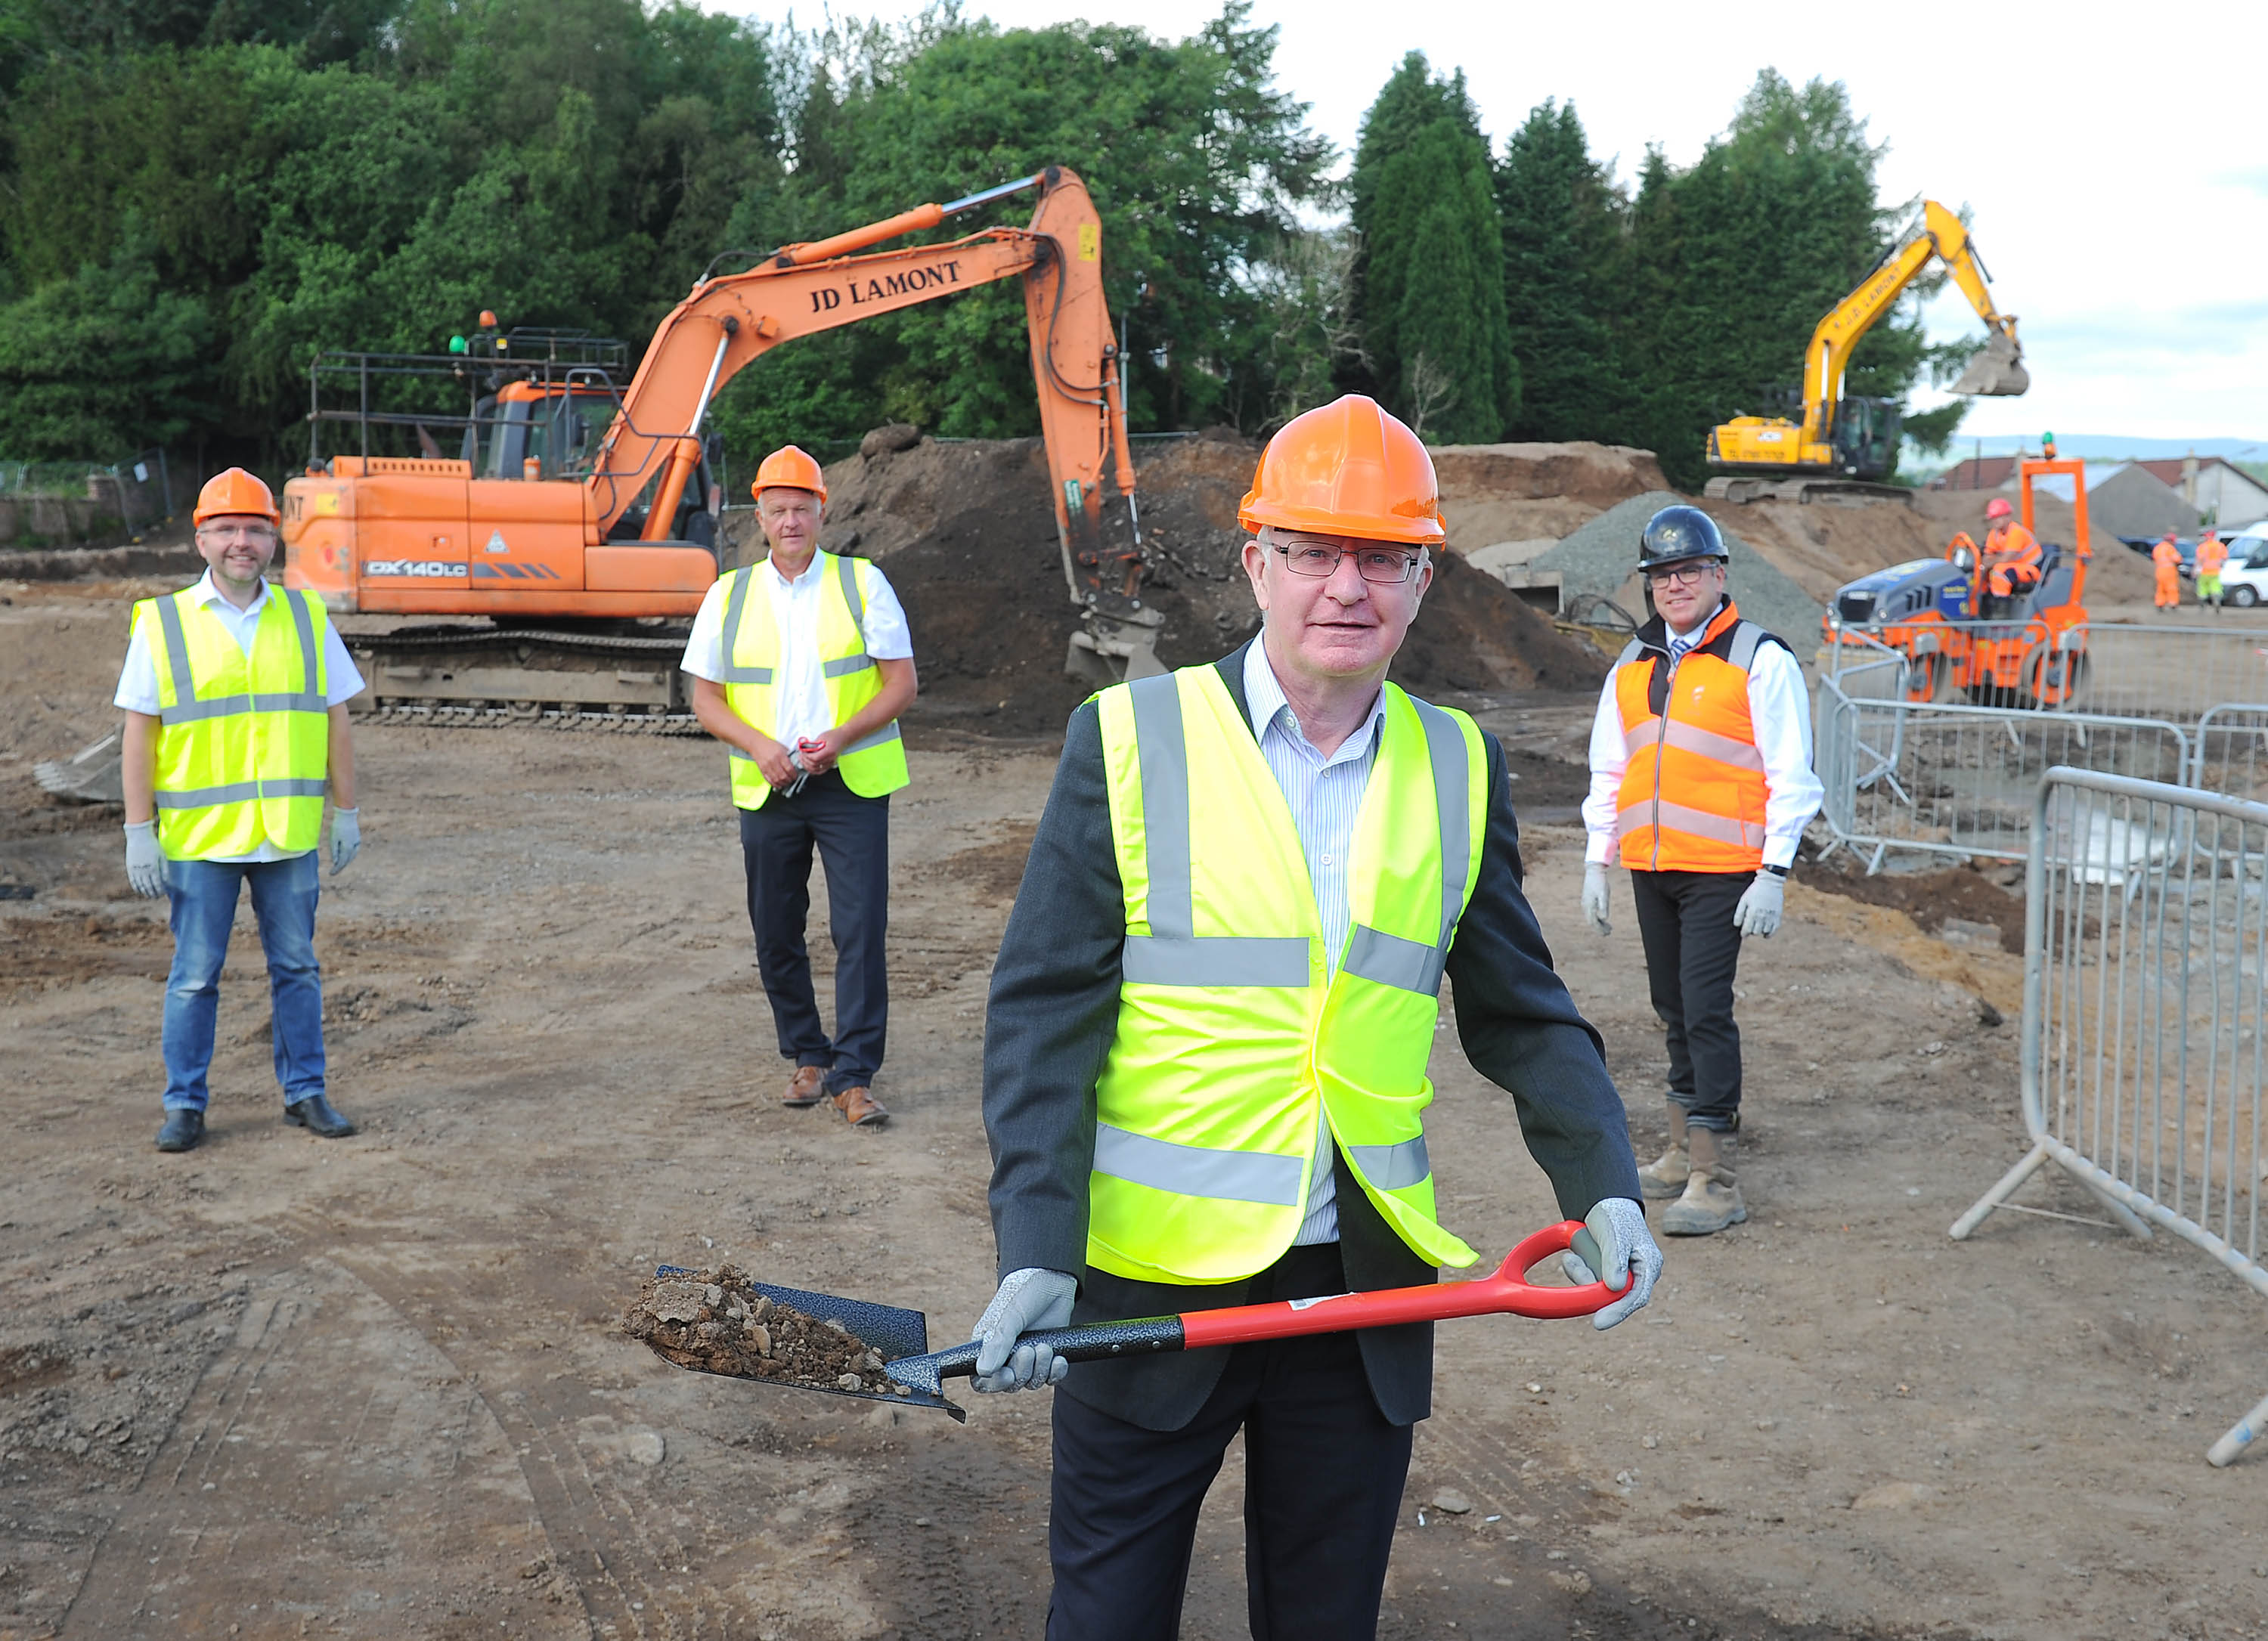 Work begins on 22 new affordable homes at former Cowie school in Stirling